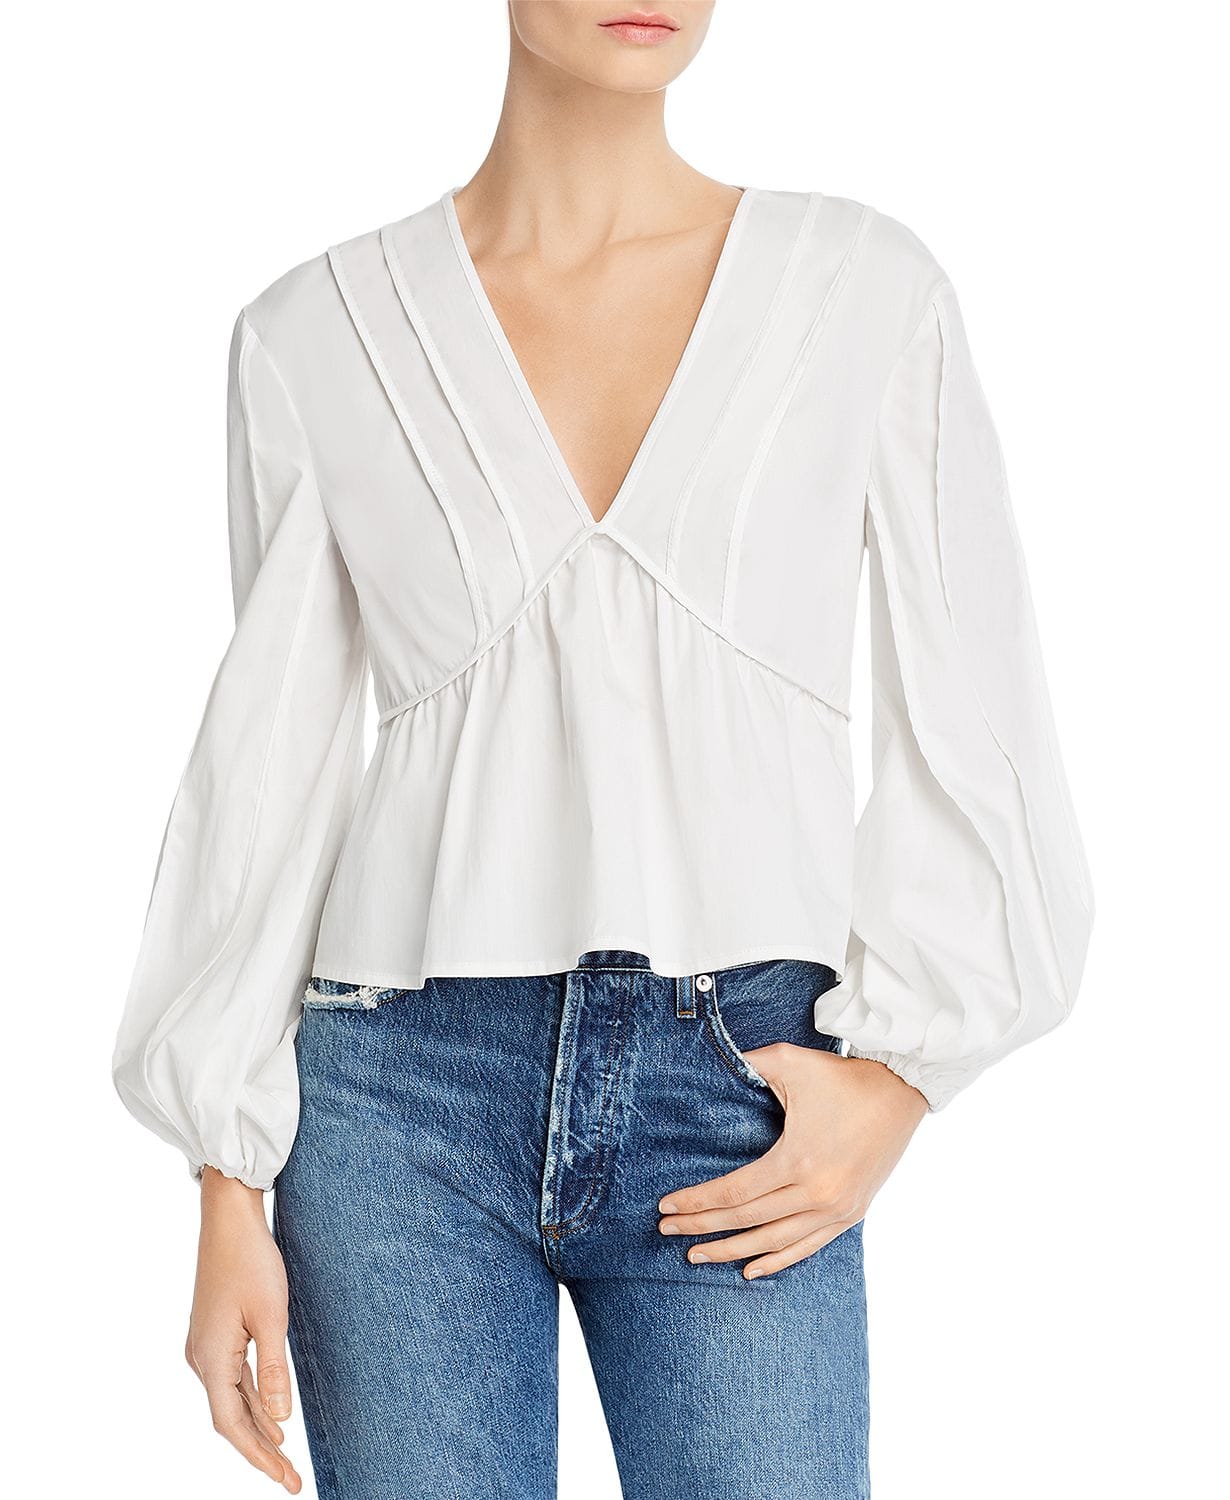 woocommerce-673321-2209615.cloudwaysapps.com-cmeo-collective-womens-white-lie-awake-long-sleeve-ruffled-top